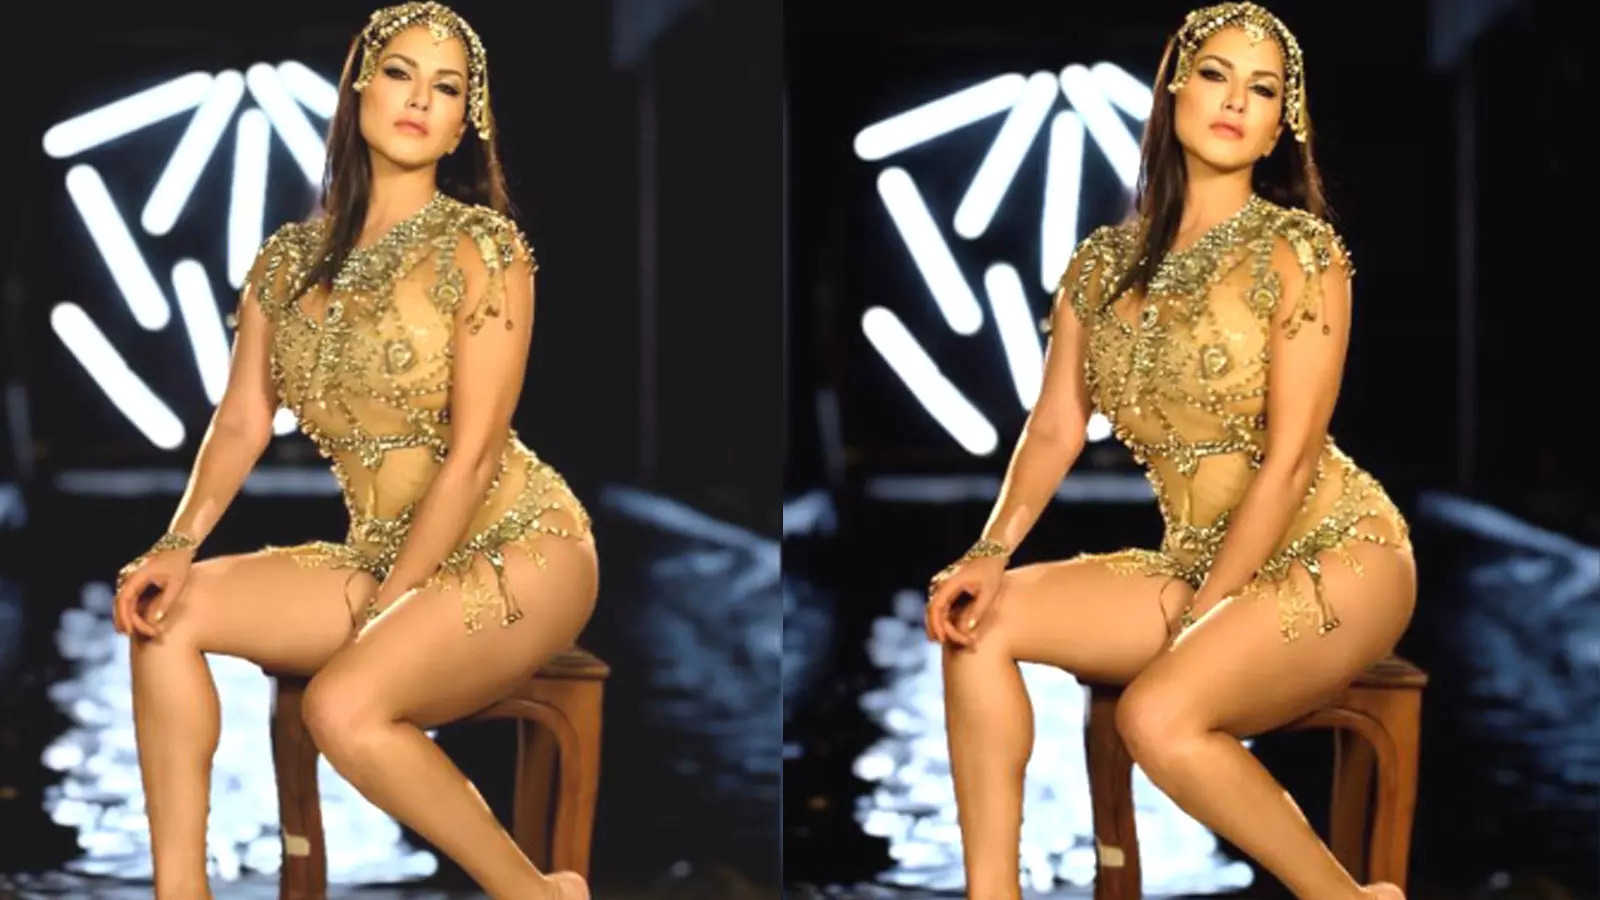 Sunny Leone flaunts her glamorous avatar in a shimmery golden bodysuit;  fans call her 'Queen of million hearts' | Hindi Movie News - Bollywood -  Times of India